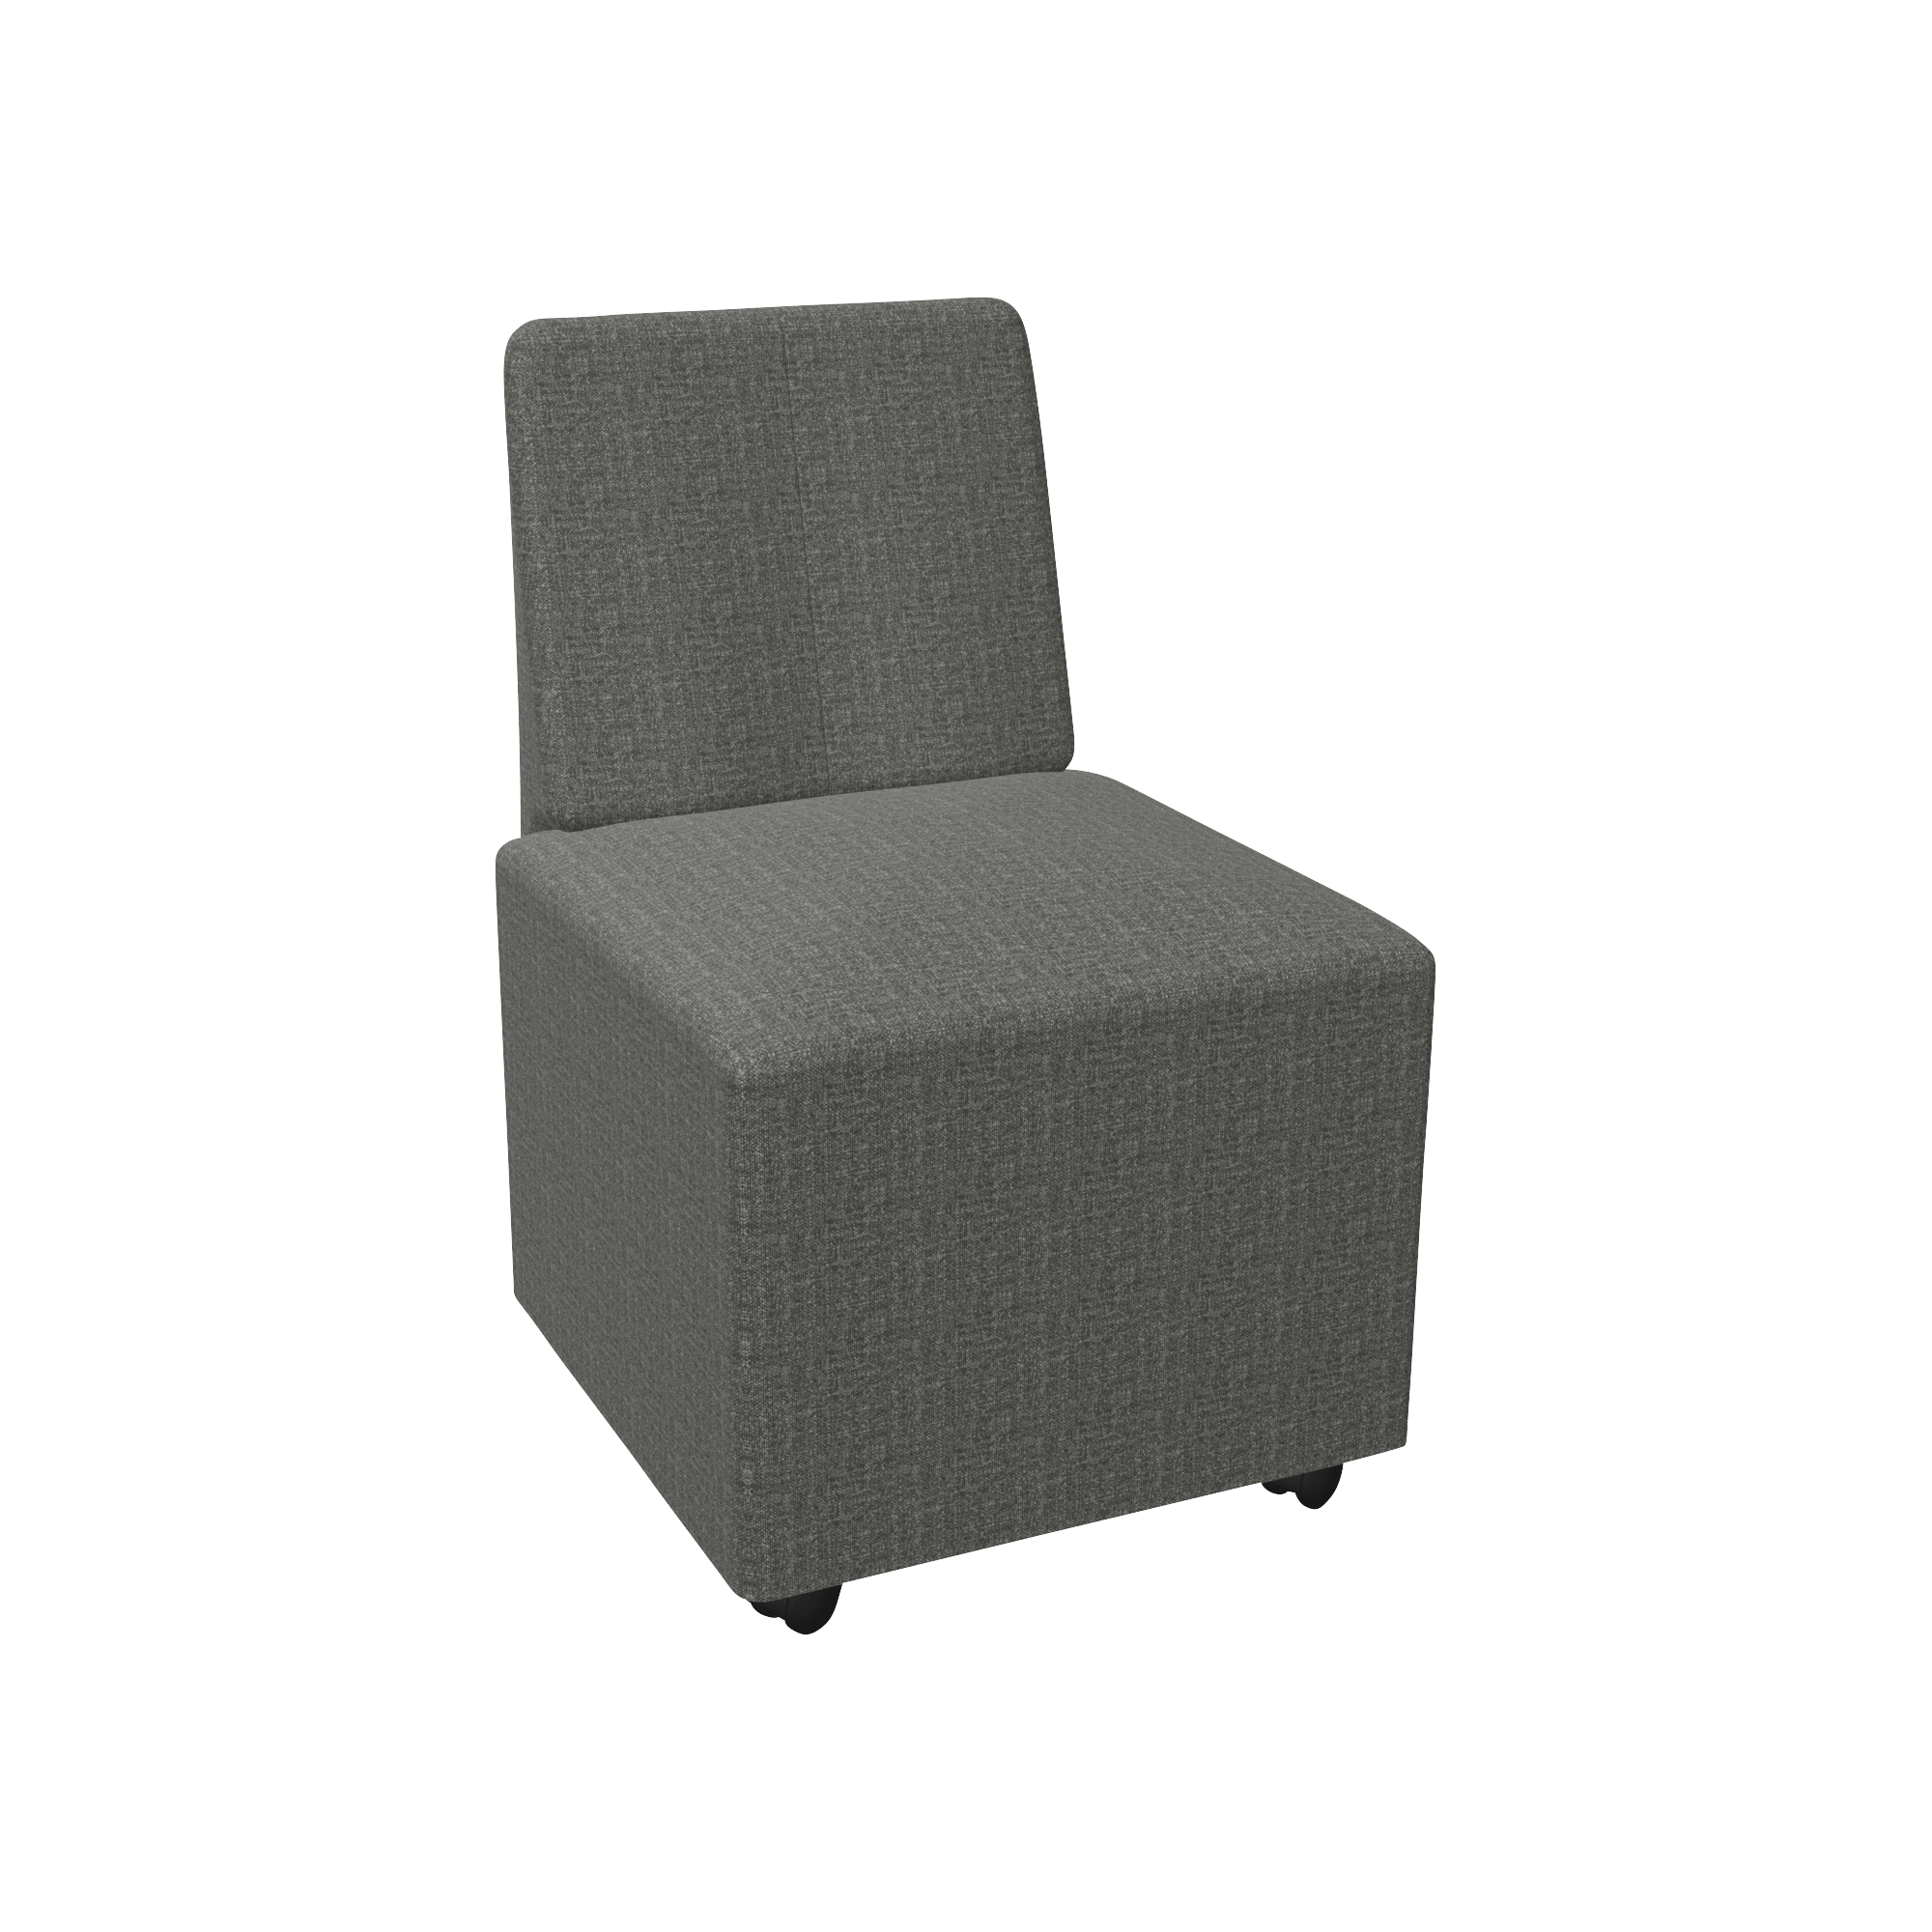 upholstered scooter chair with wide back rests